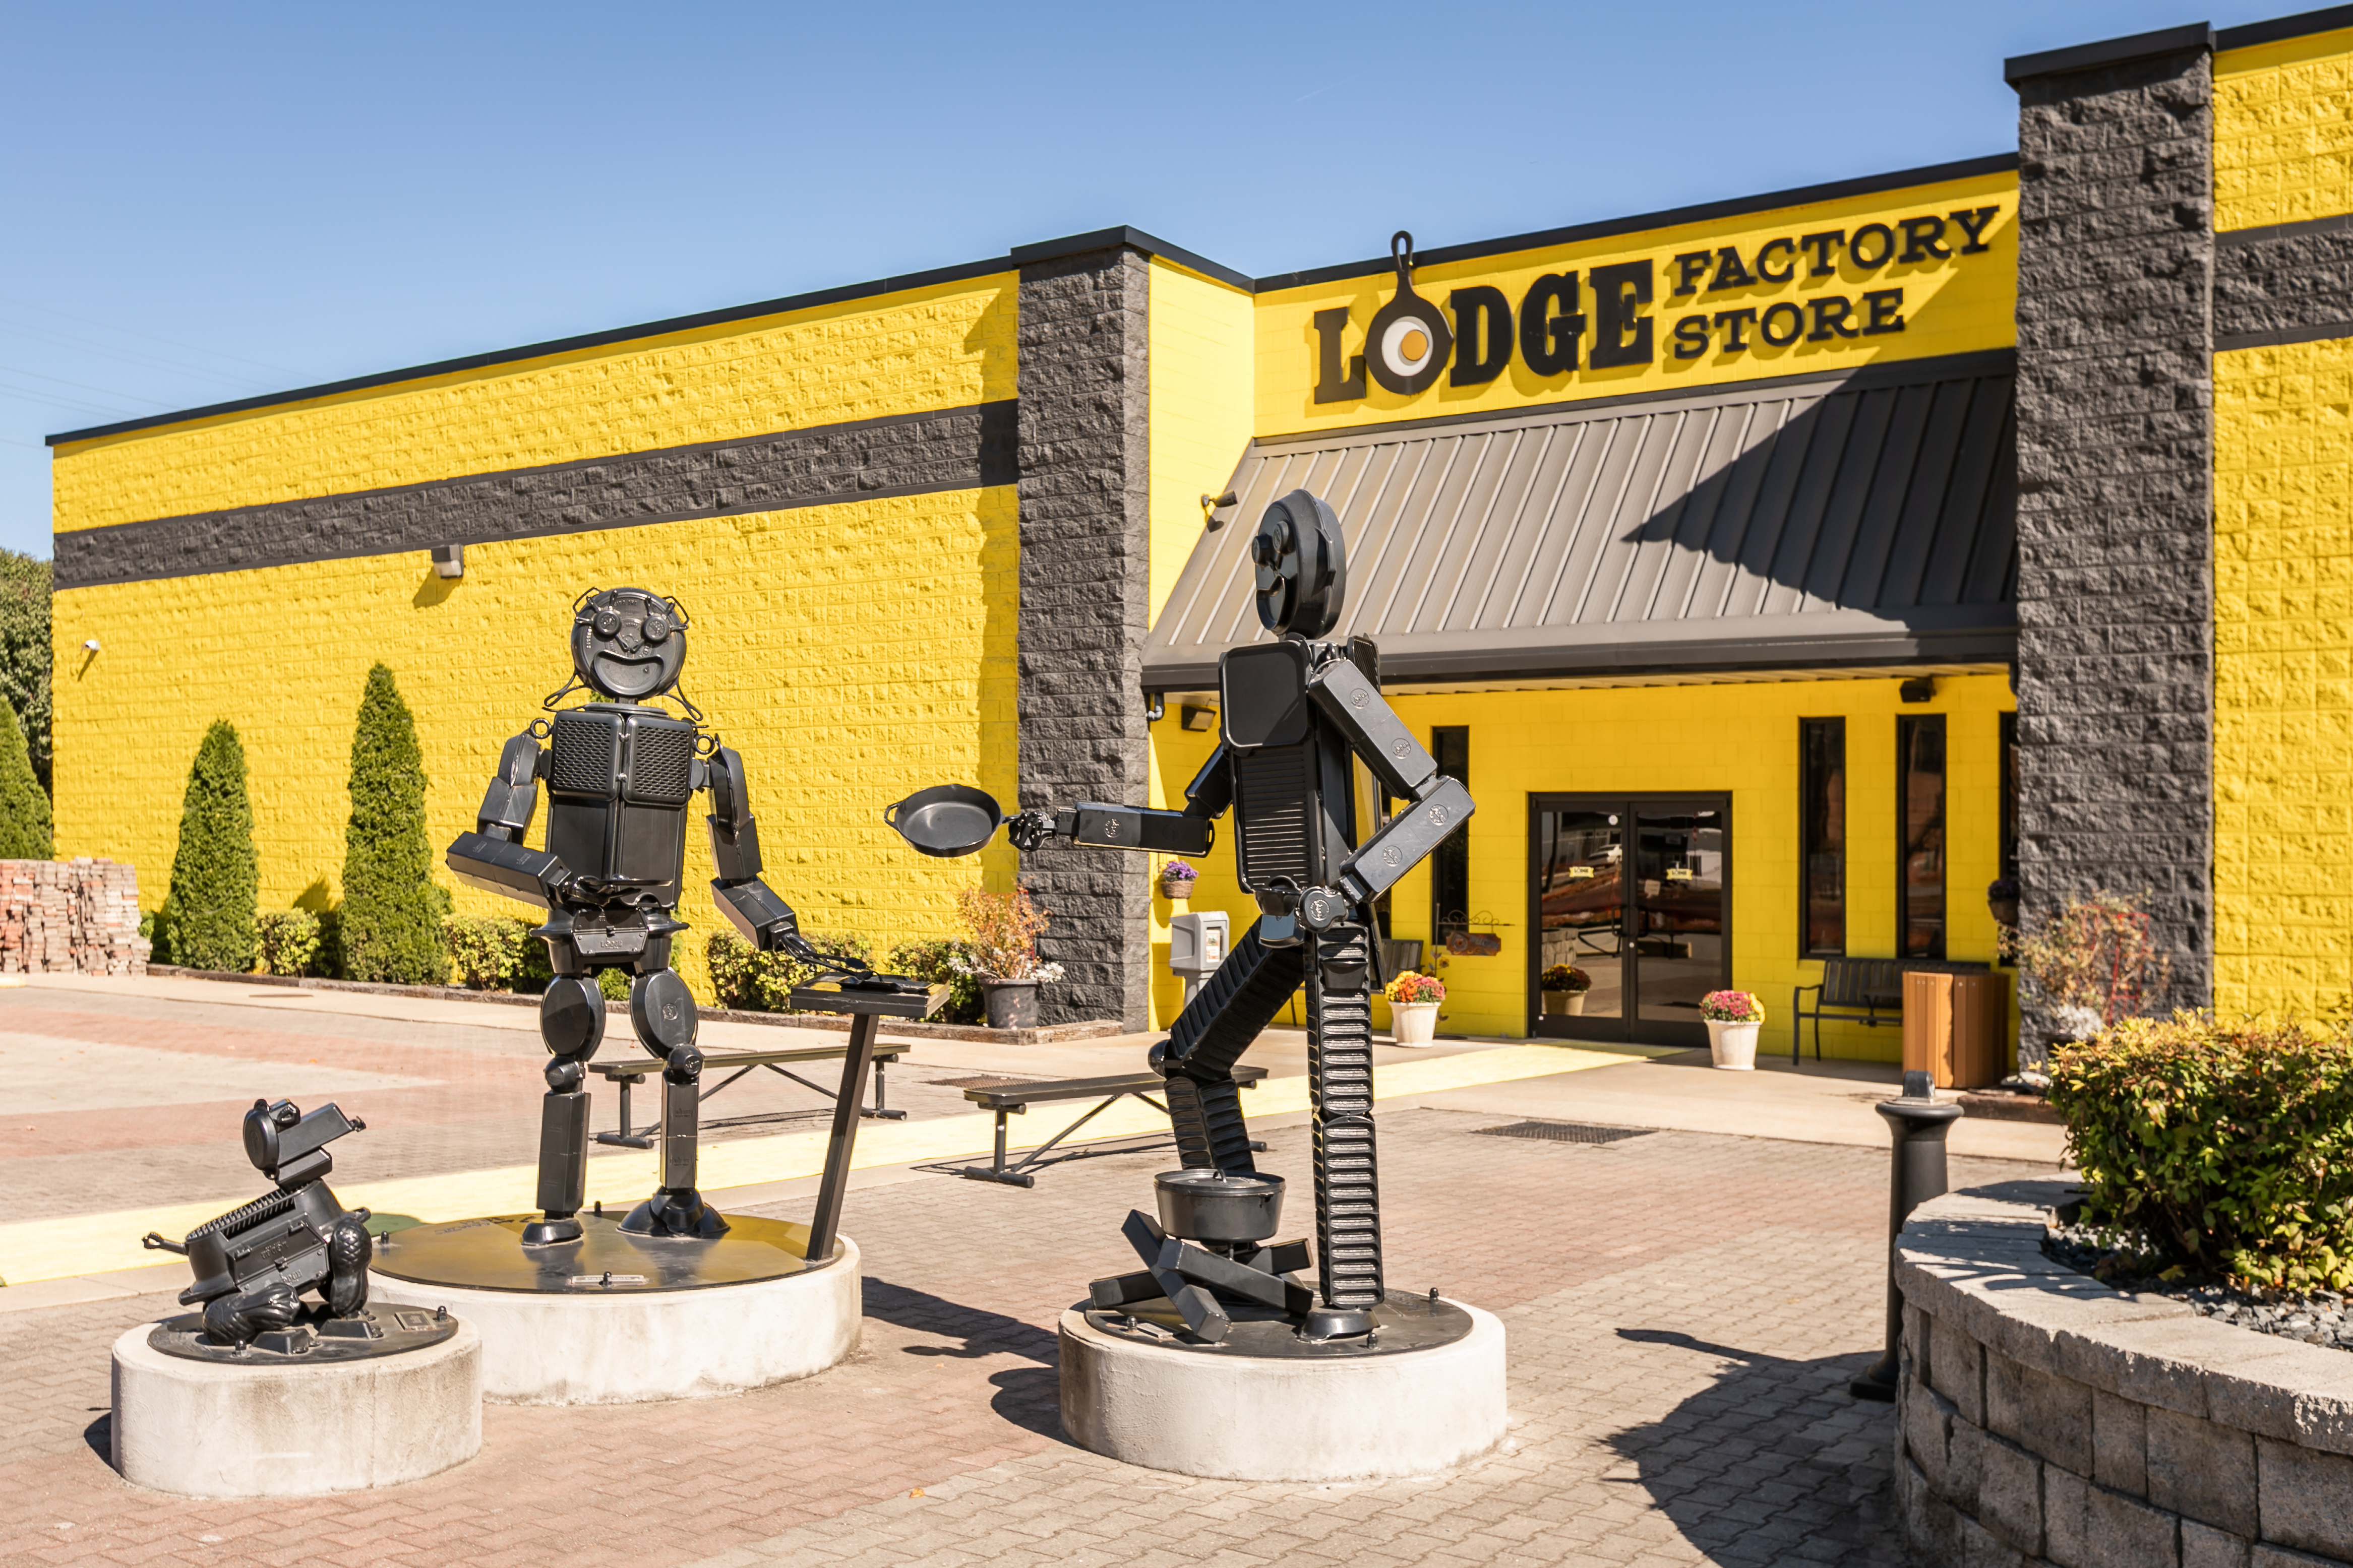 Great merchandise, good prices, noisy store - Review of Lodge Cast Iron  Factory Store - South Pittsburg, South Pittsburg, TN - Tripadvisor